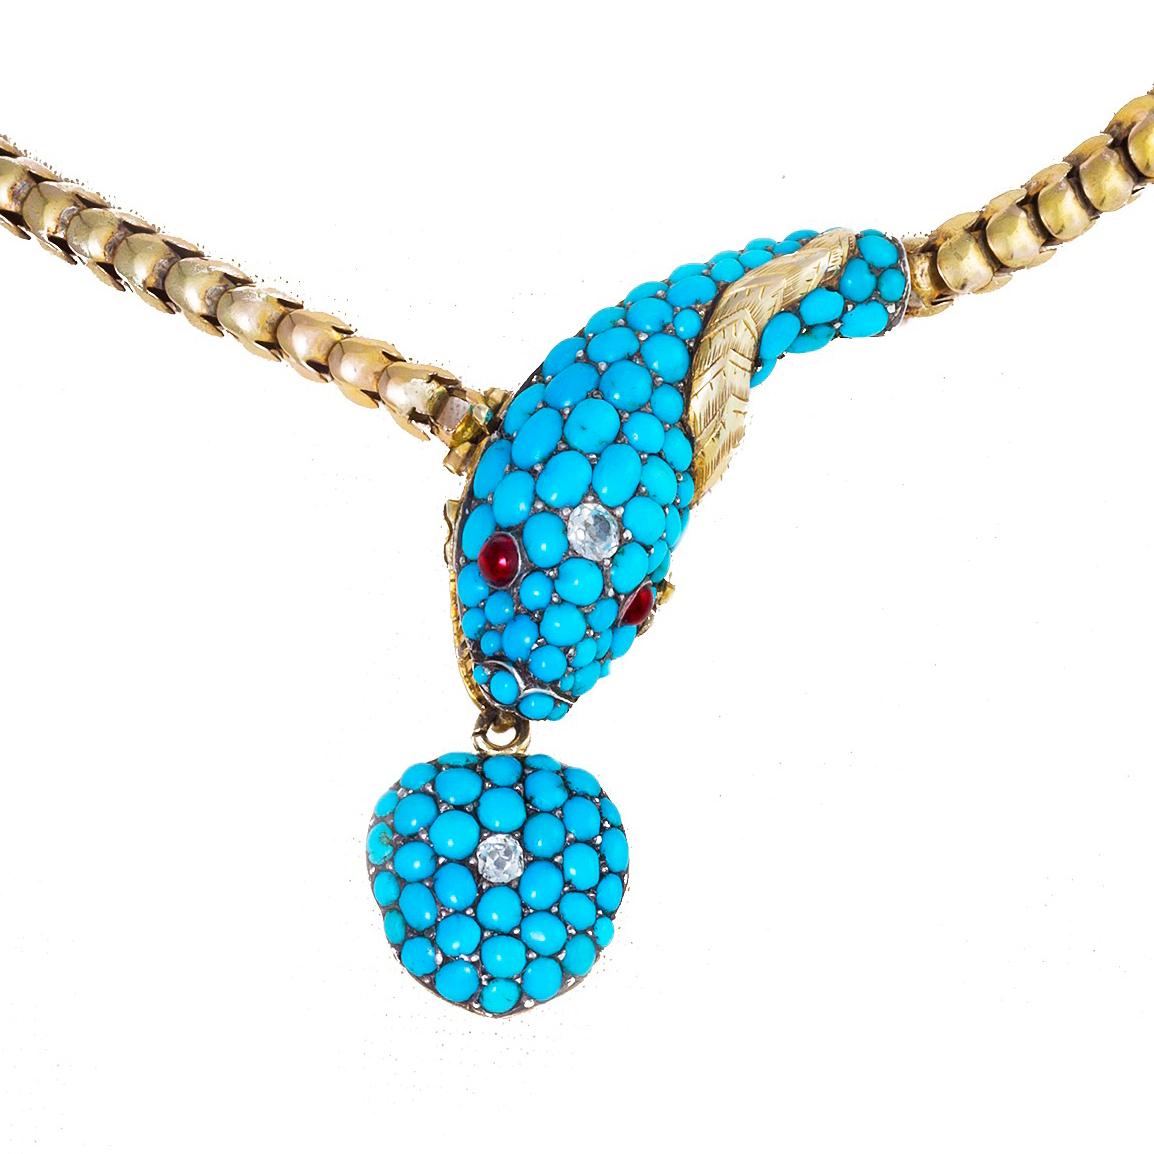 Cabochon Turquoise and Gold Serpent Locket Necklace